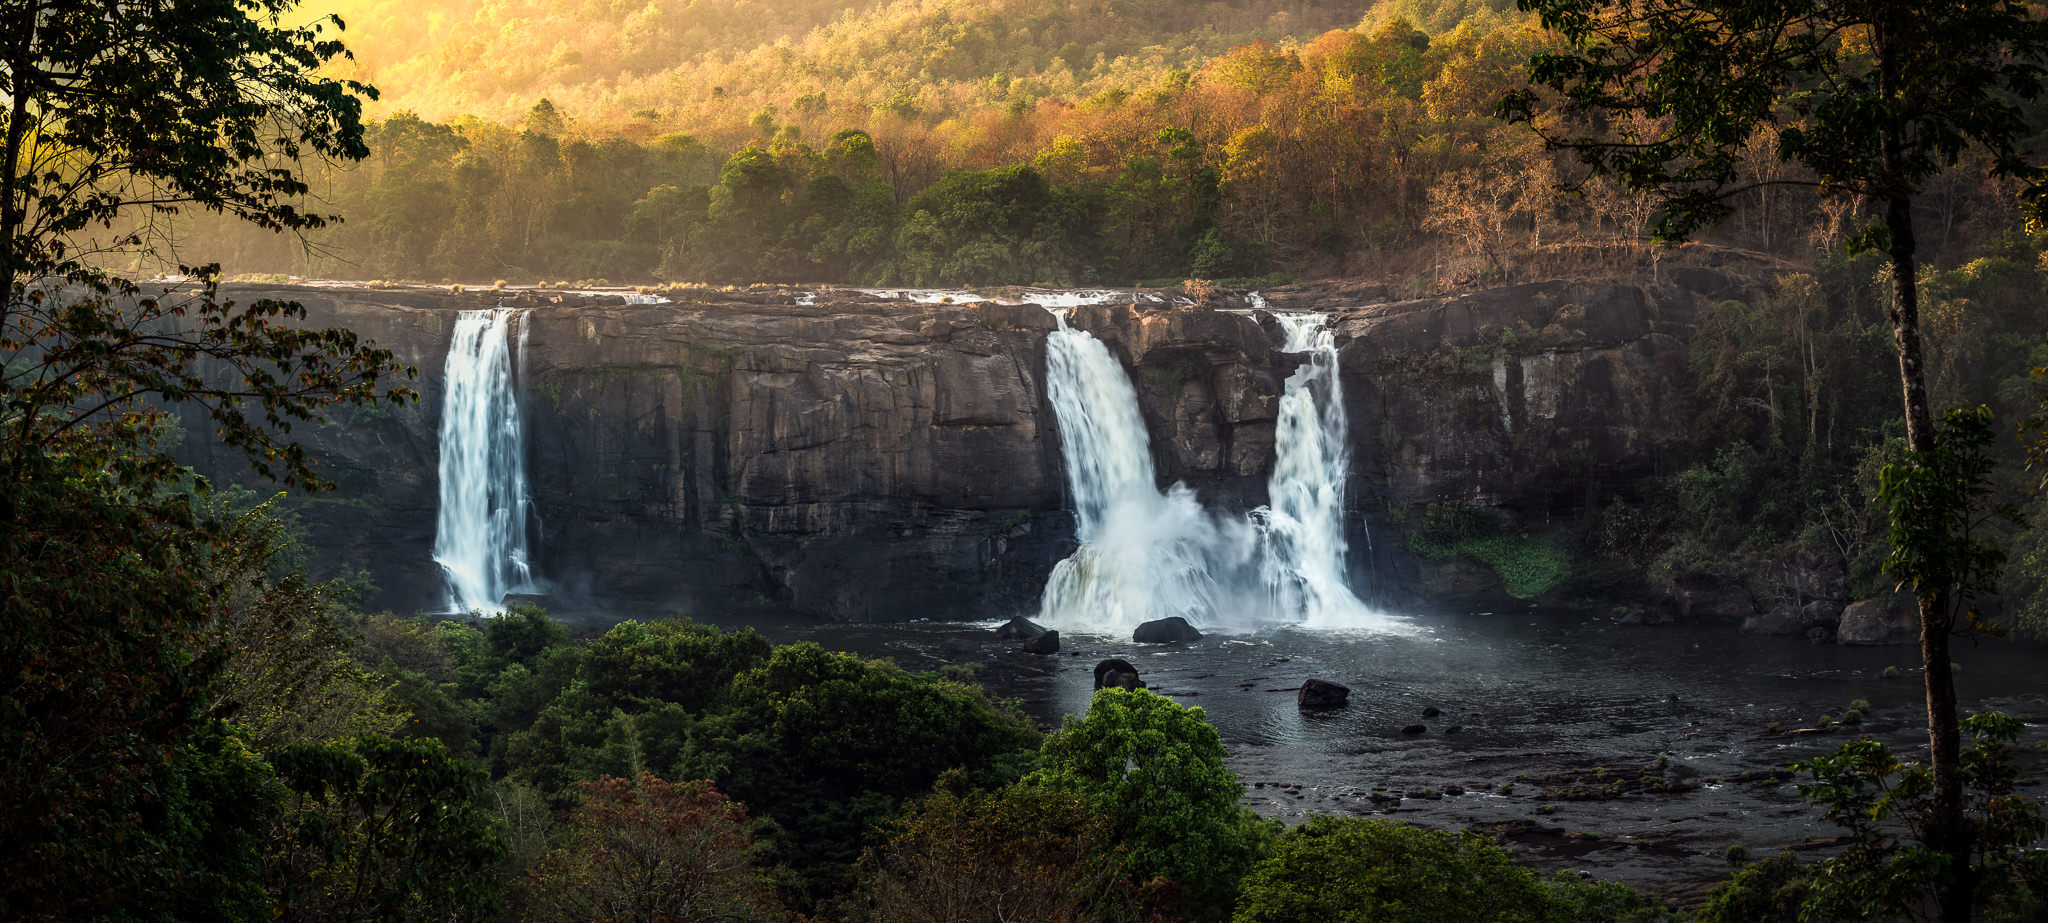 Beyond the Crowds – Exploring India’s Lesser-Known Monsoon Destinations